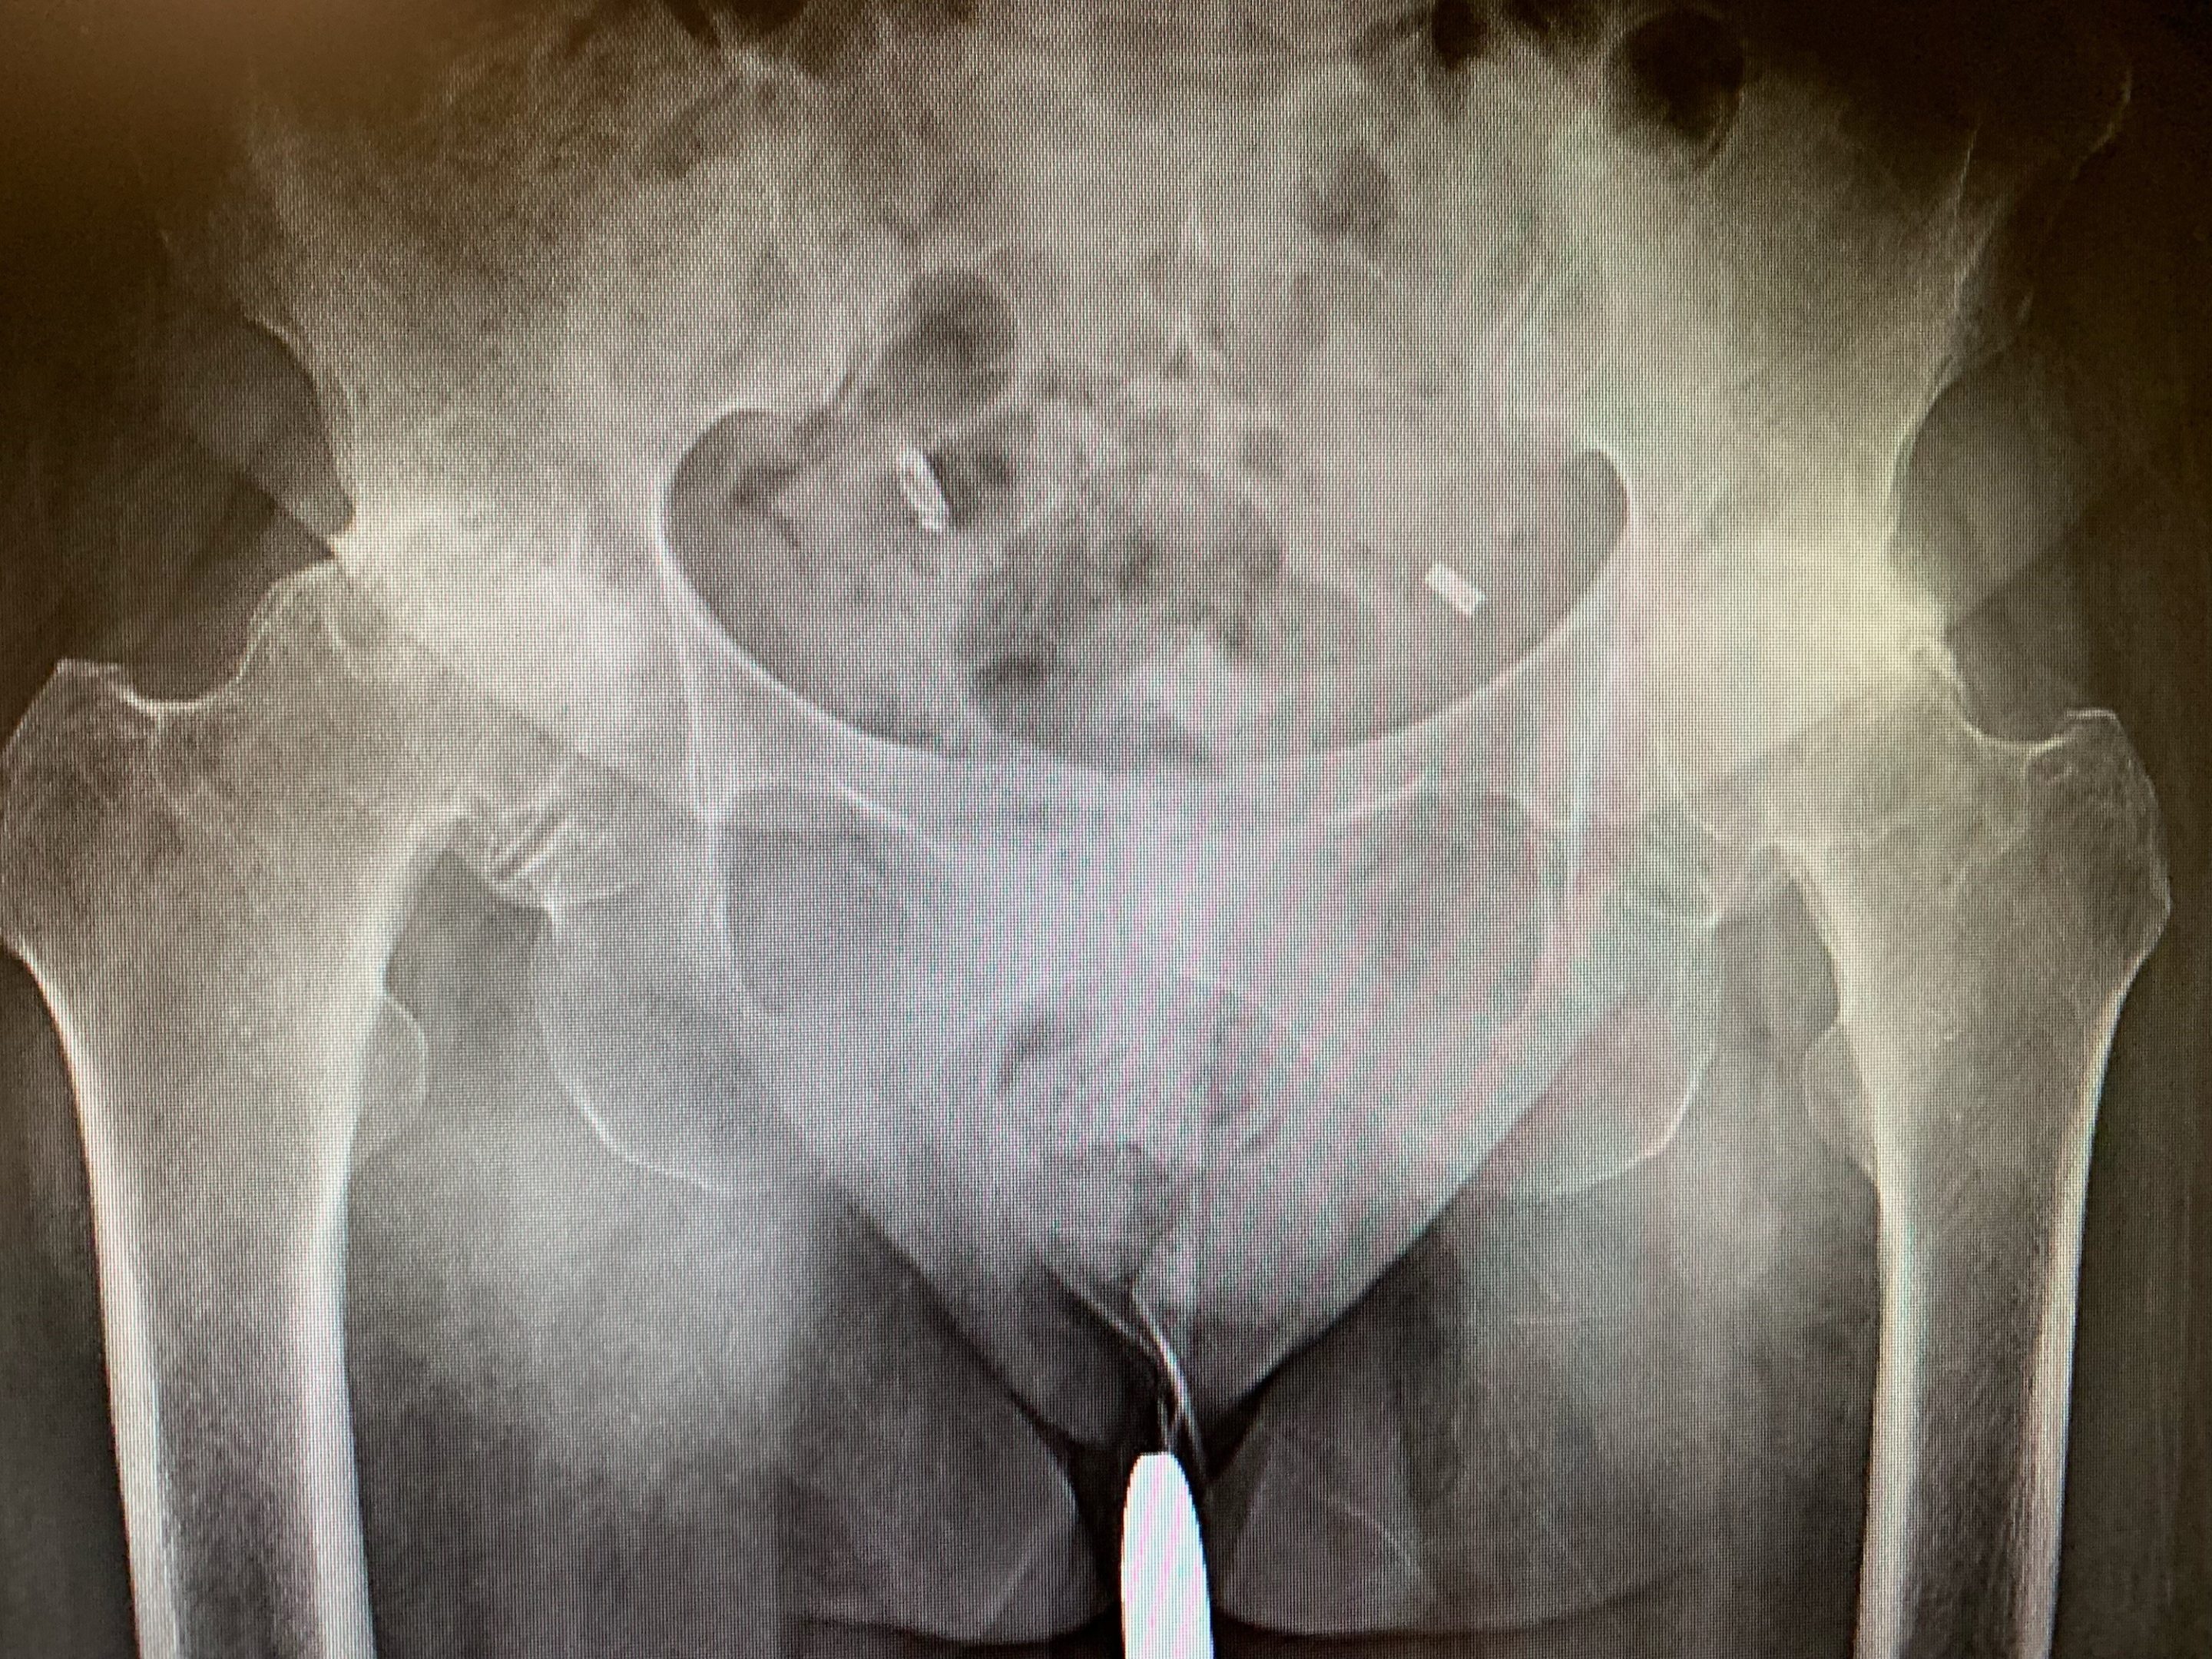 Bilateral hip replacement in 66 year old femalea